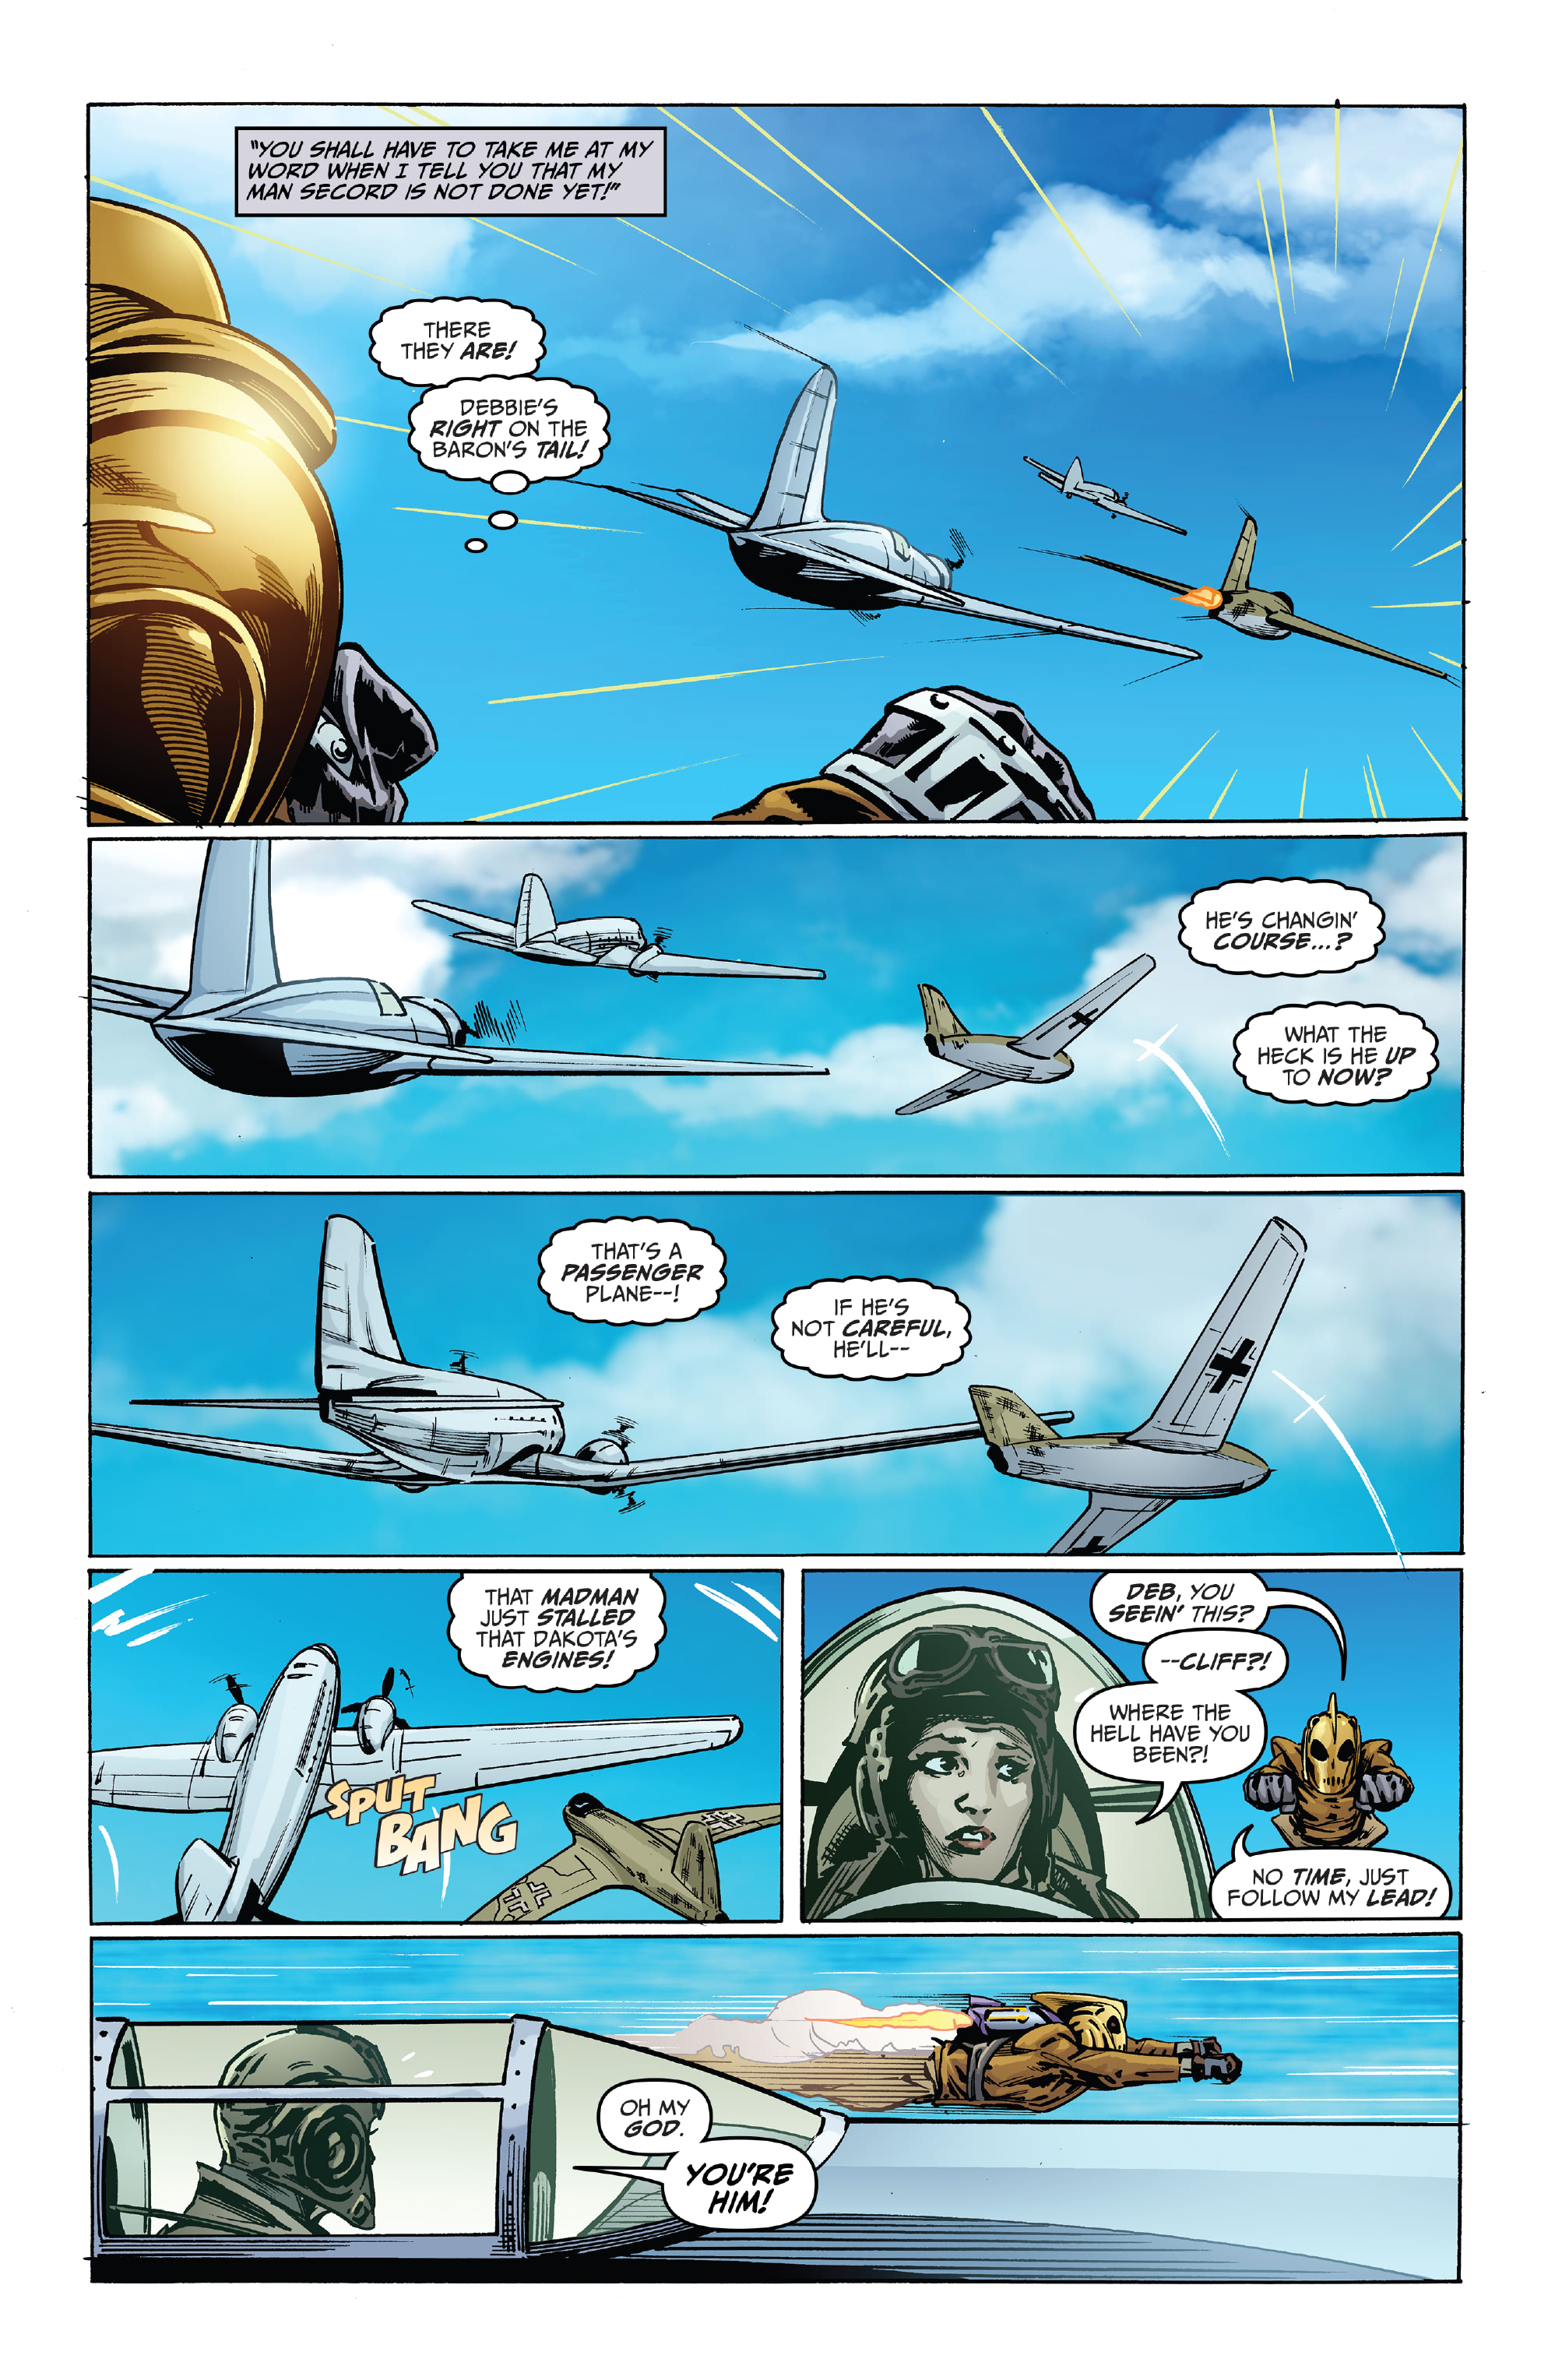 The Rocketeer: The Great Race (2022-): Chapter 4 - Page 4